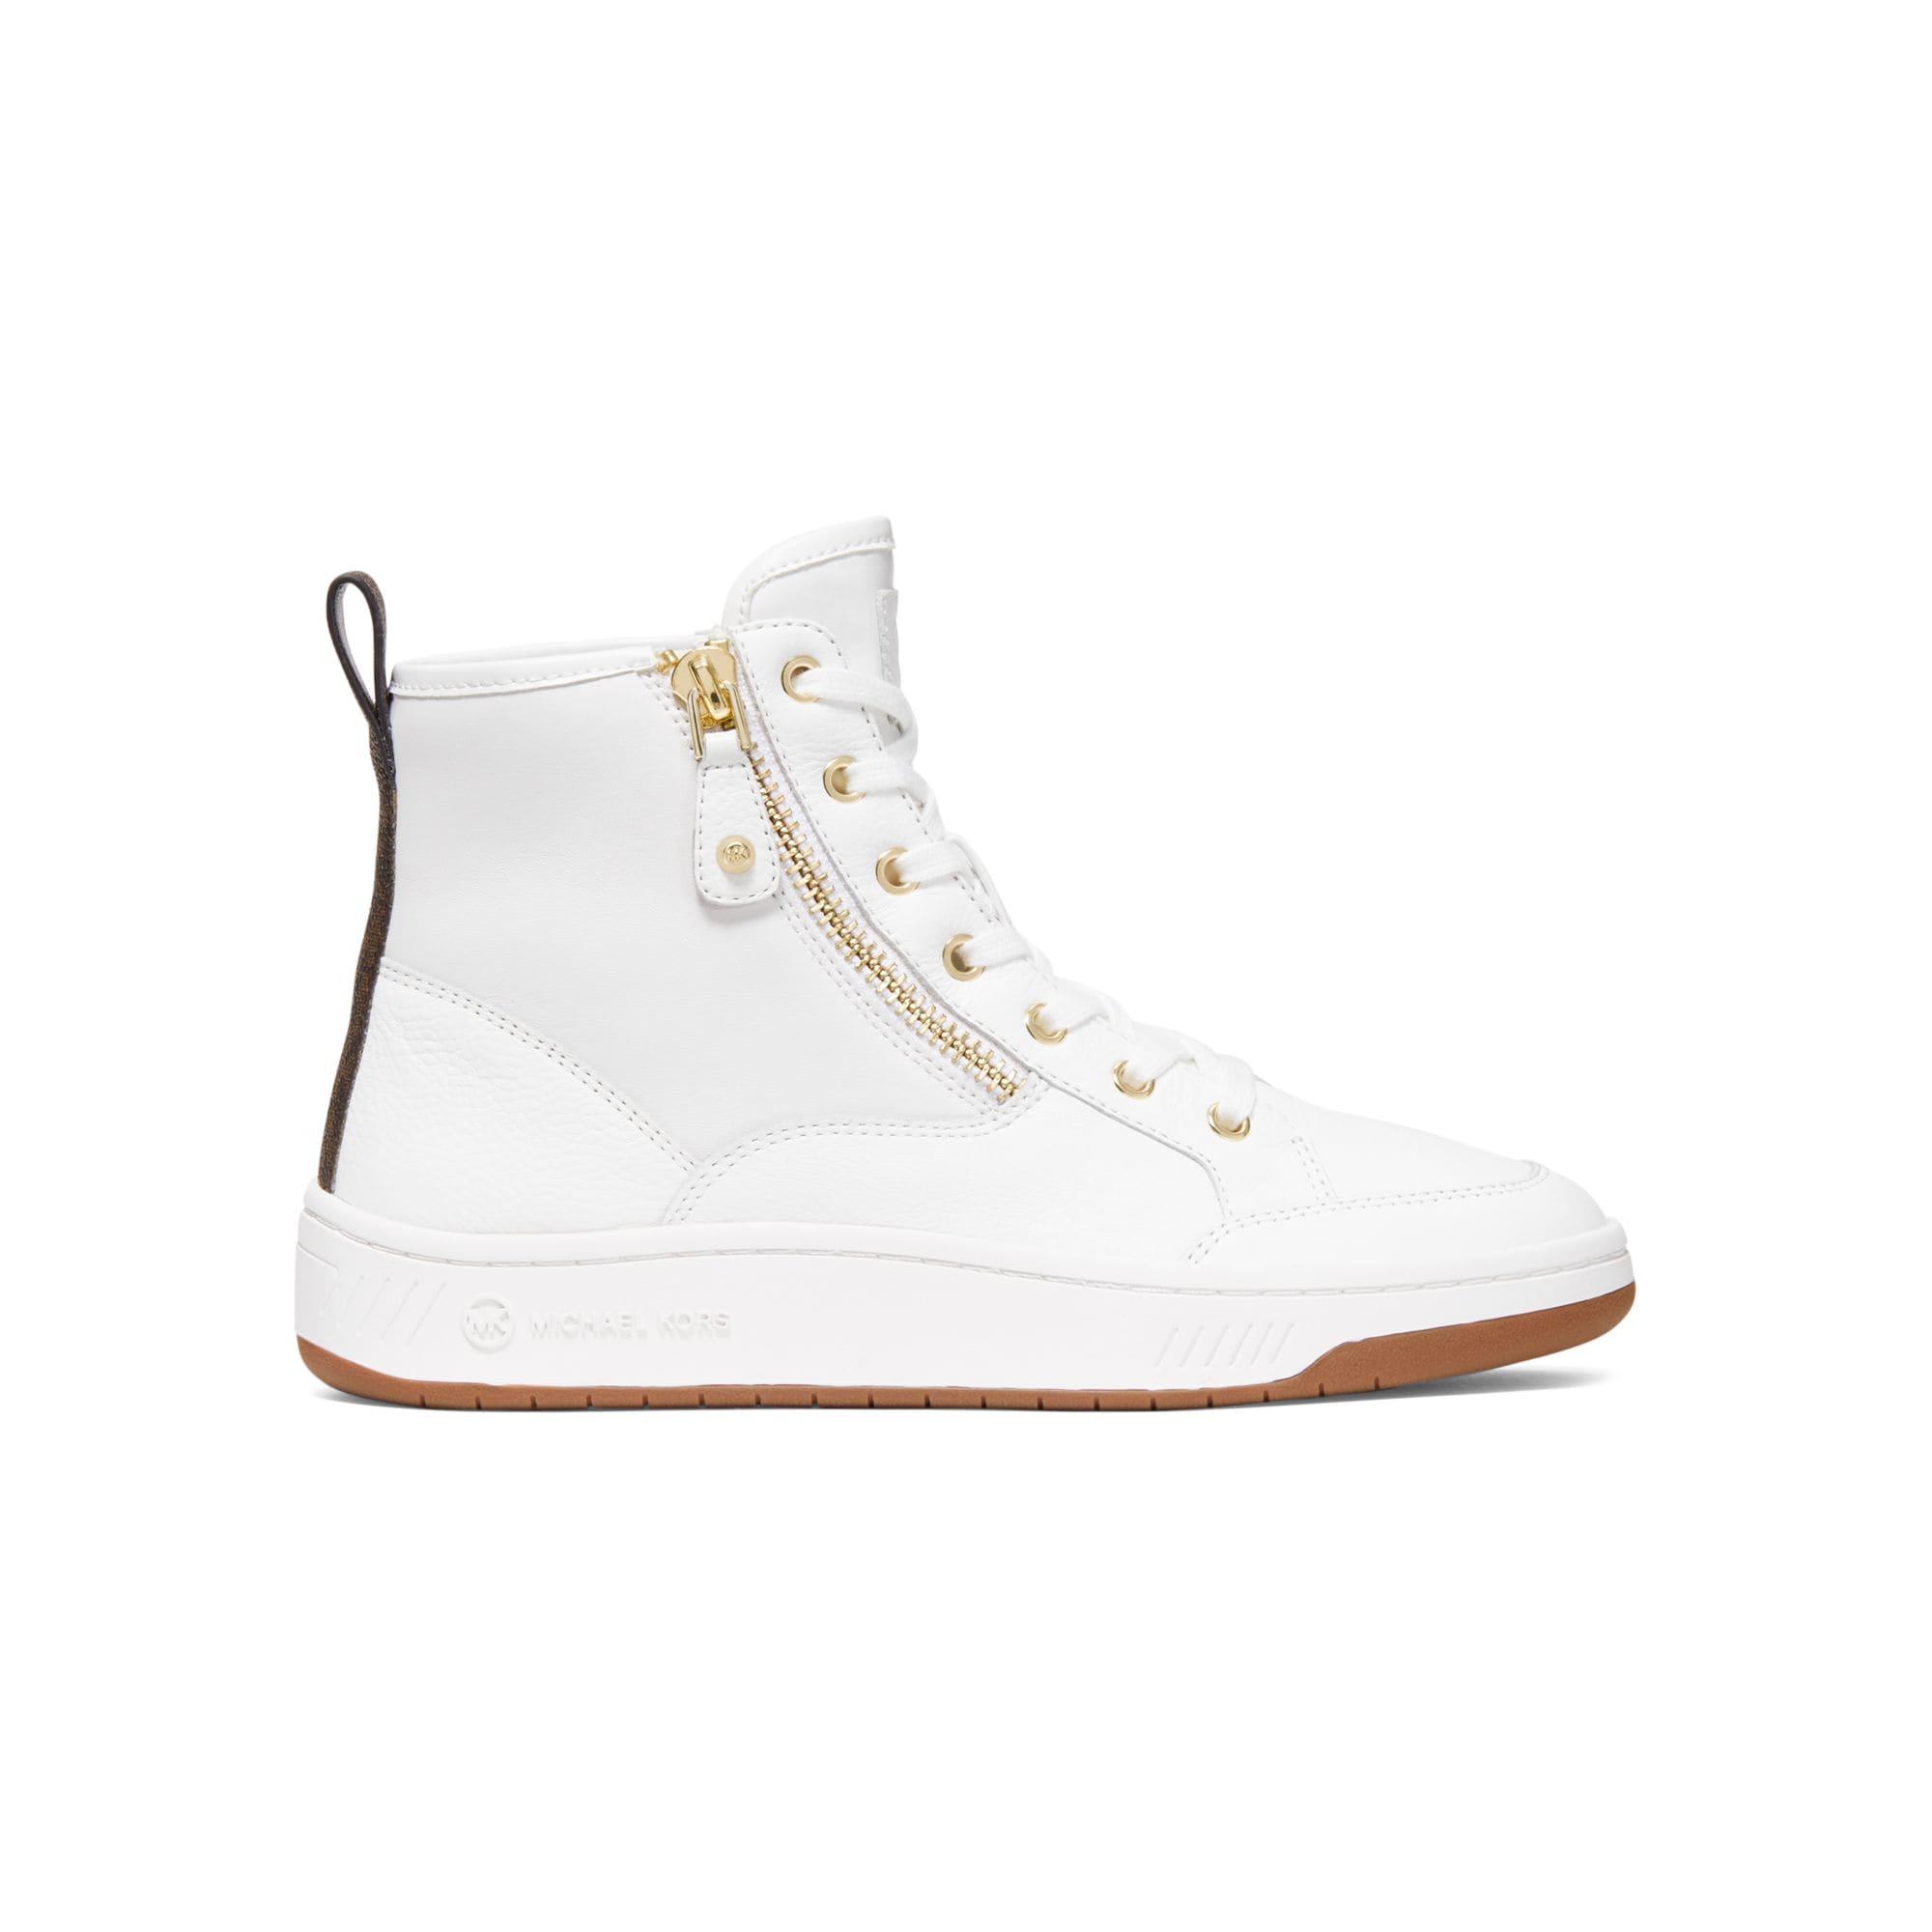 Michael Kors Shea Leather High-top Sneakers in White | Lyst